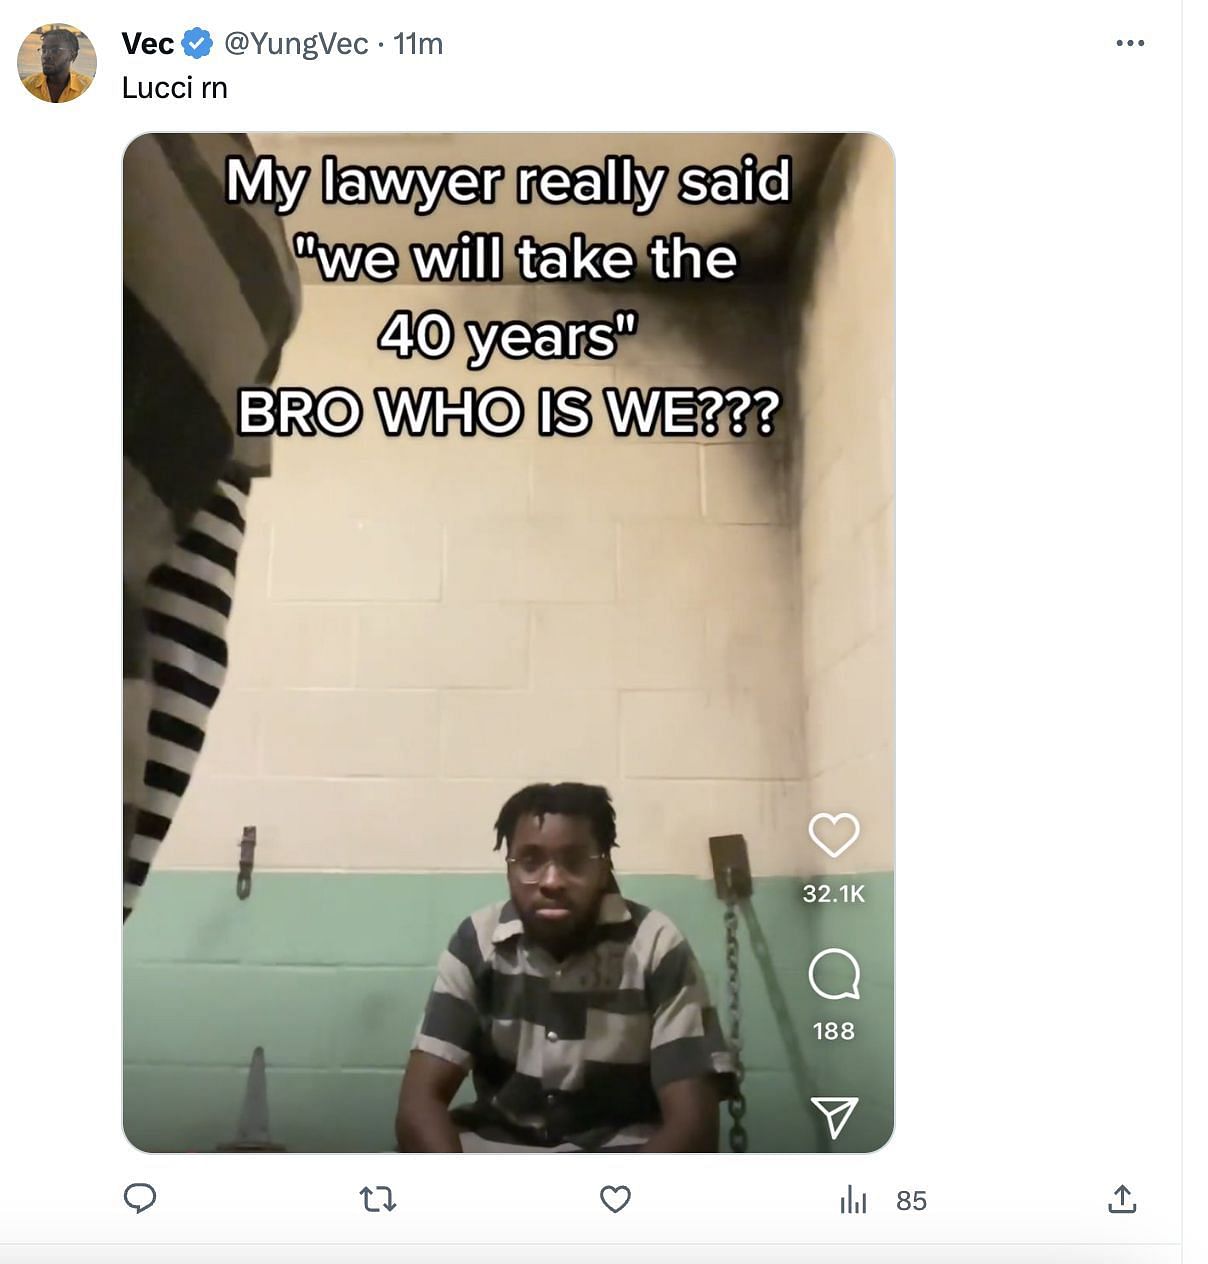 Social media users in a frenzy after the image of the rapper from inside the prison went viral on the internet. (Image via Twitter)